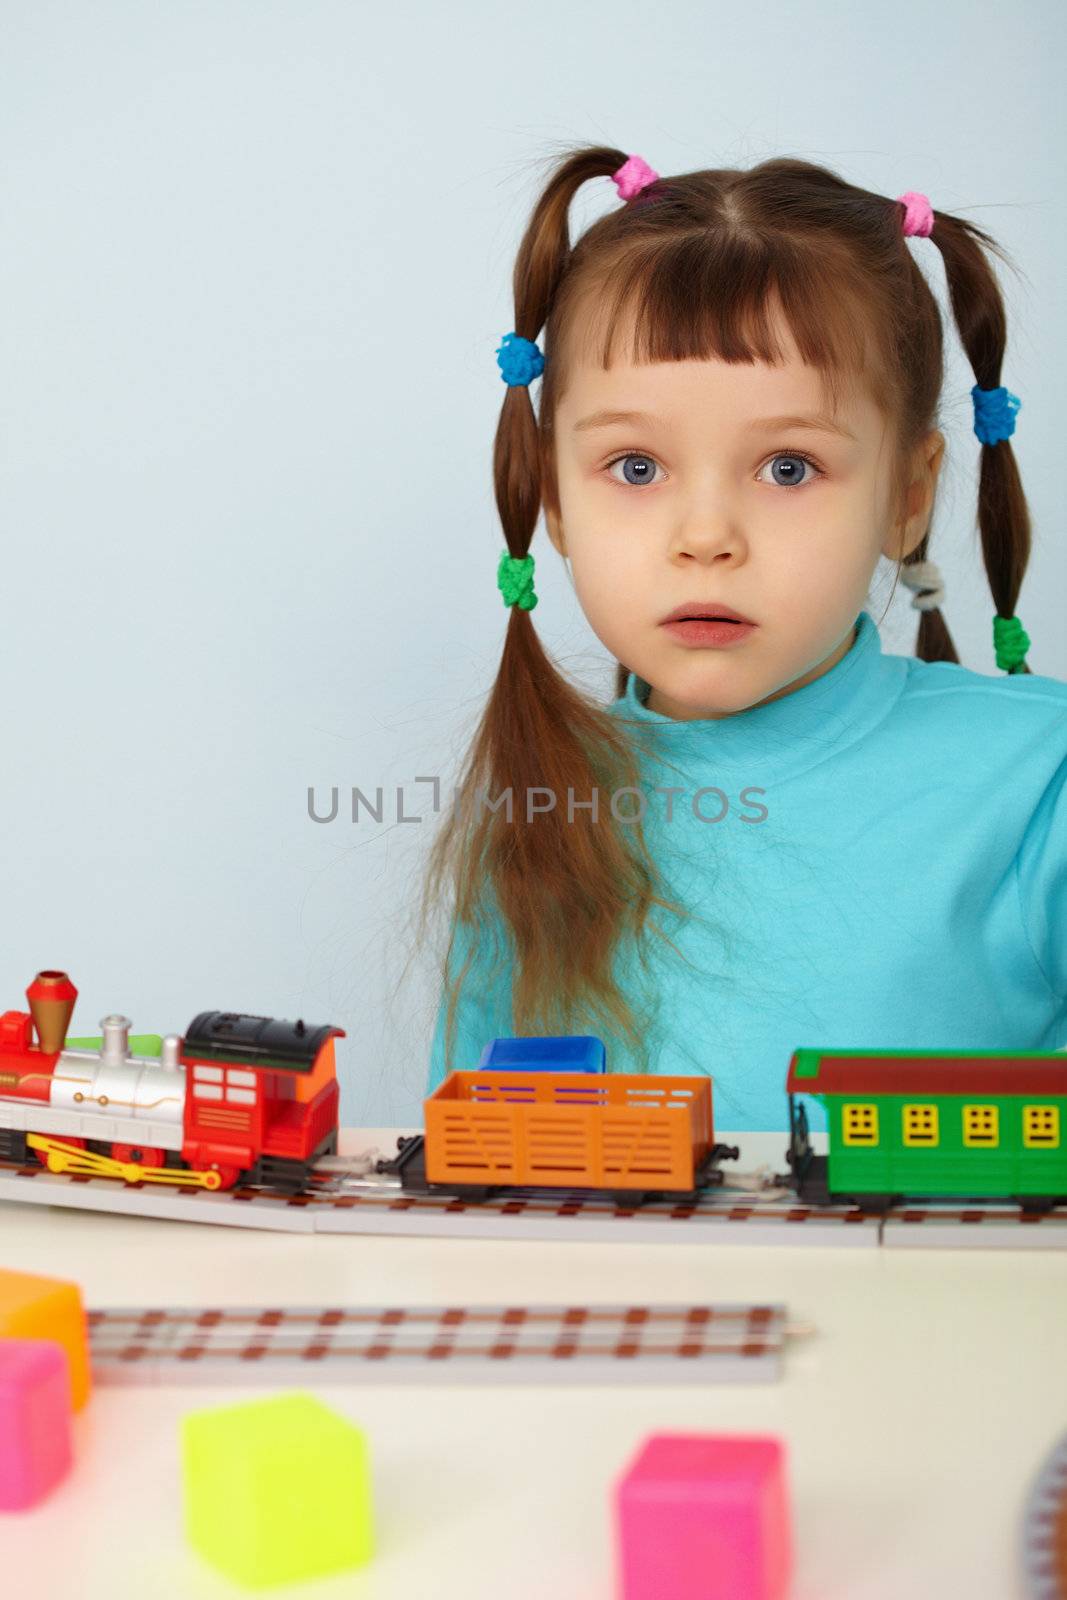 The amazed child and color toy railway